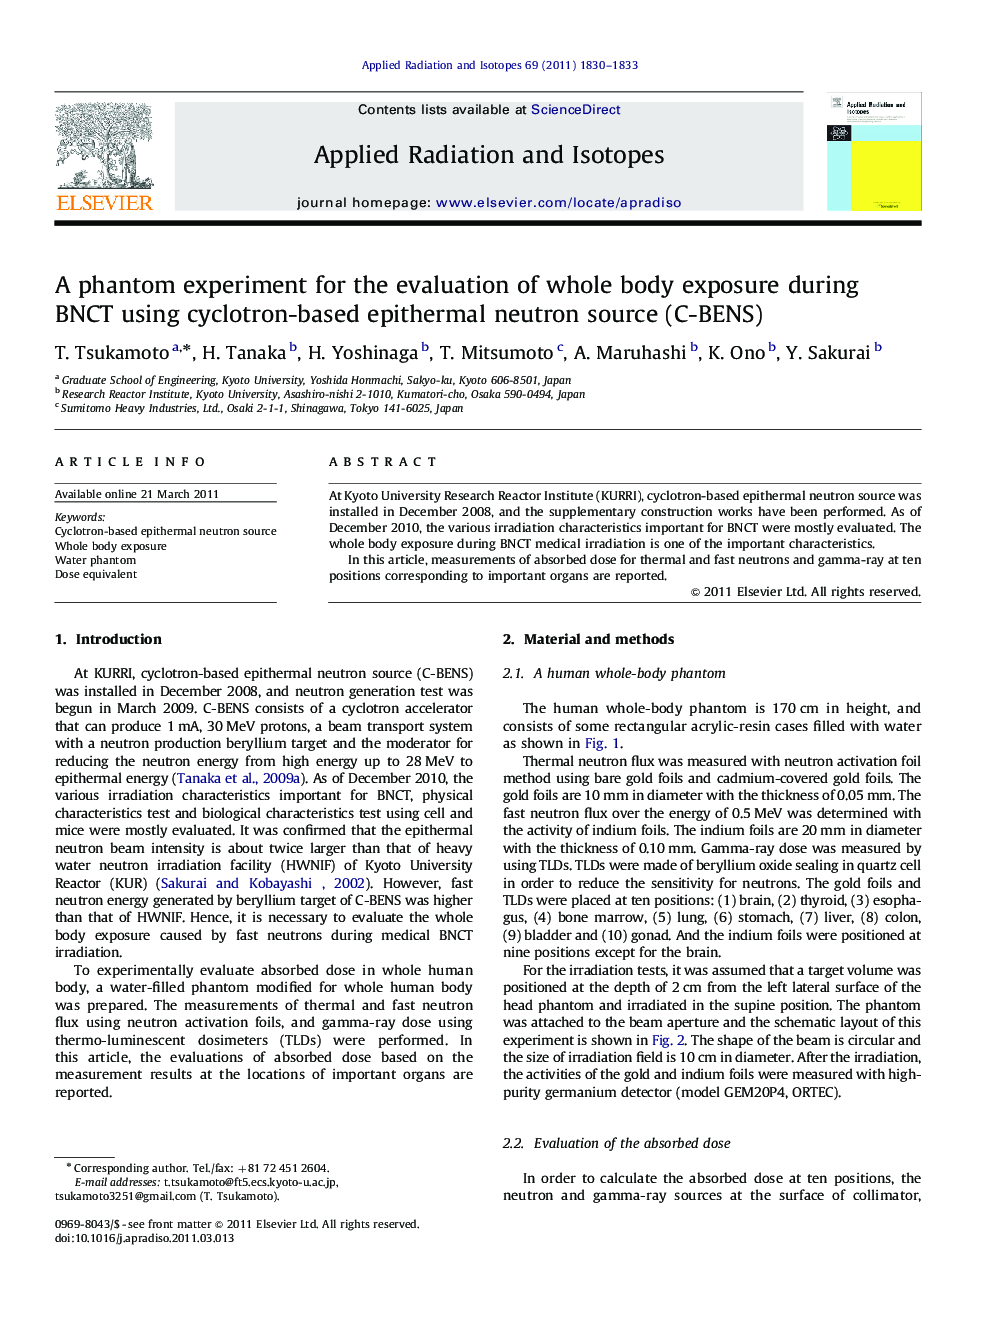 A phantom experiment for the evaluation of whole body exposure during BNCT using cyclotron-based epithermal neutron source (C-BENS)